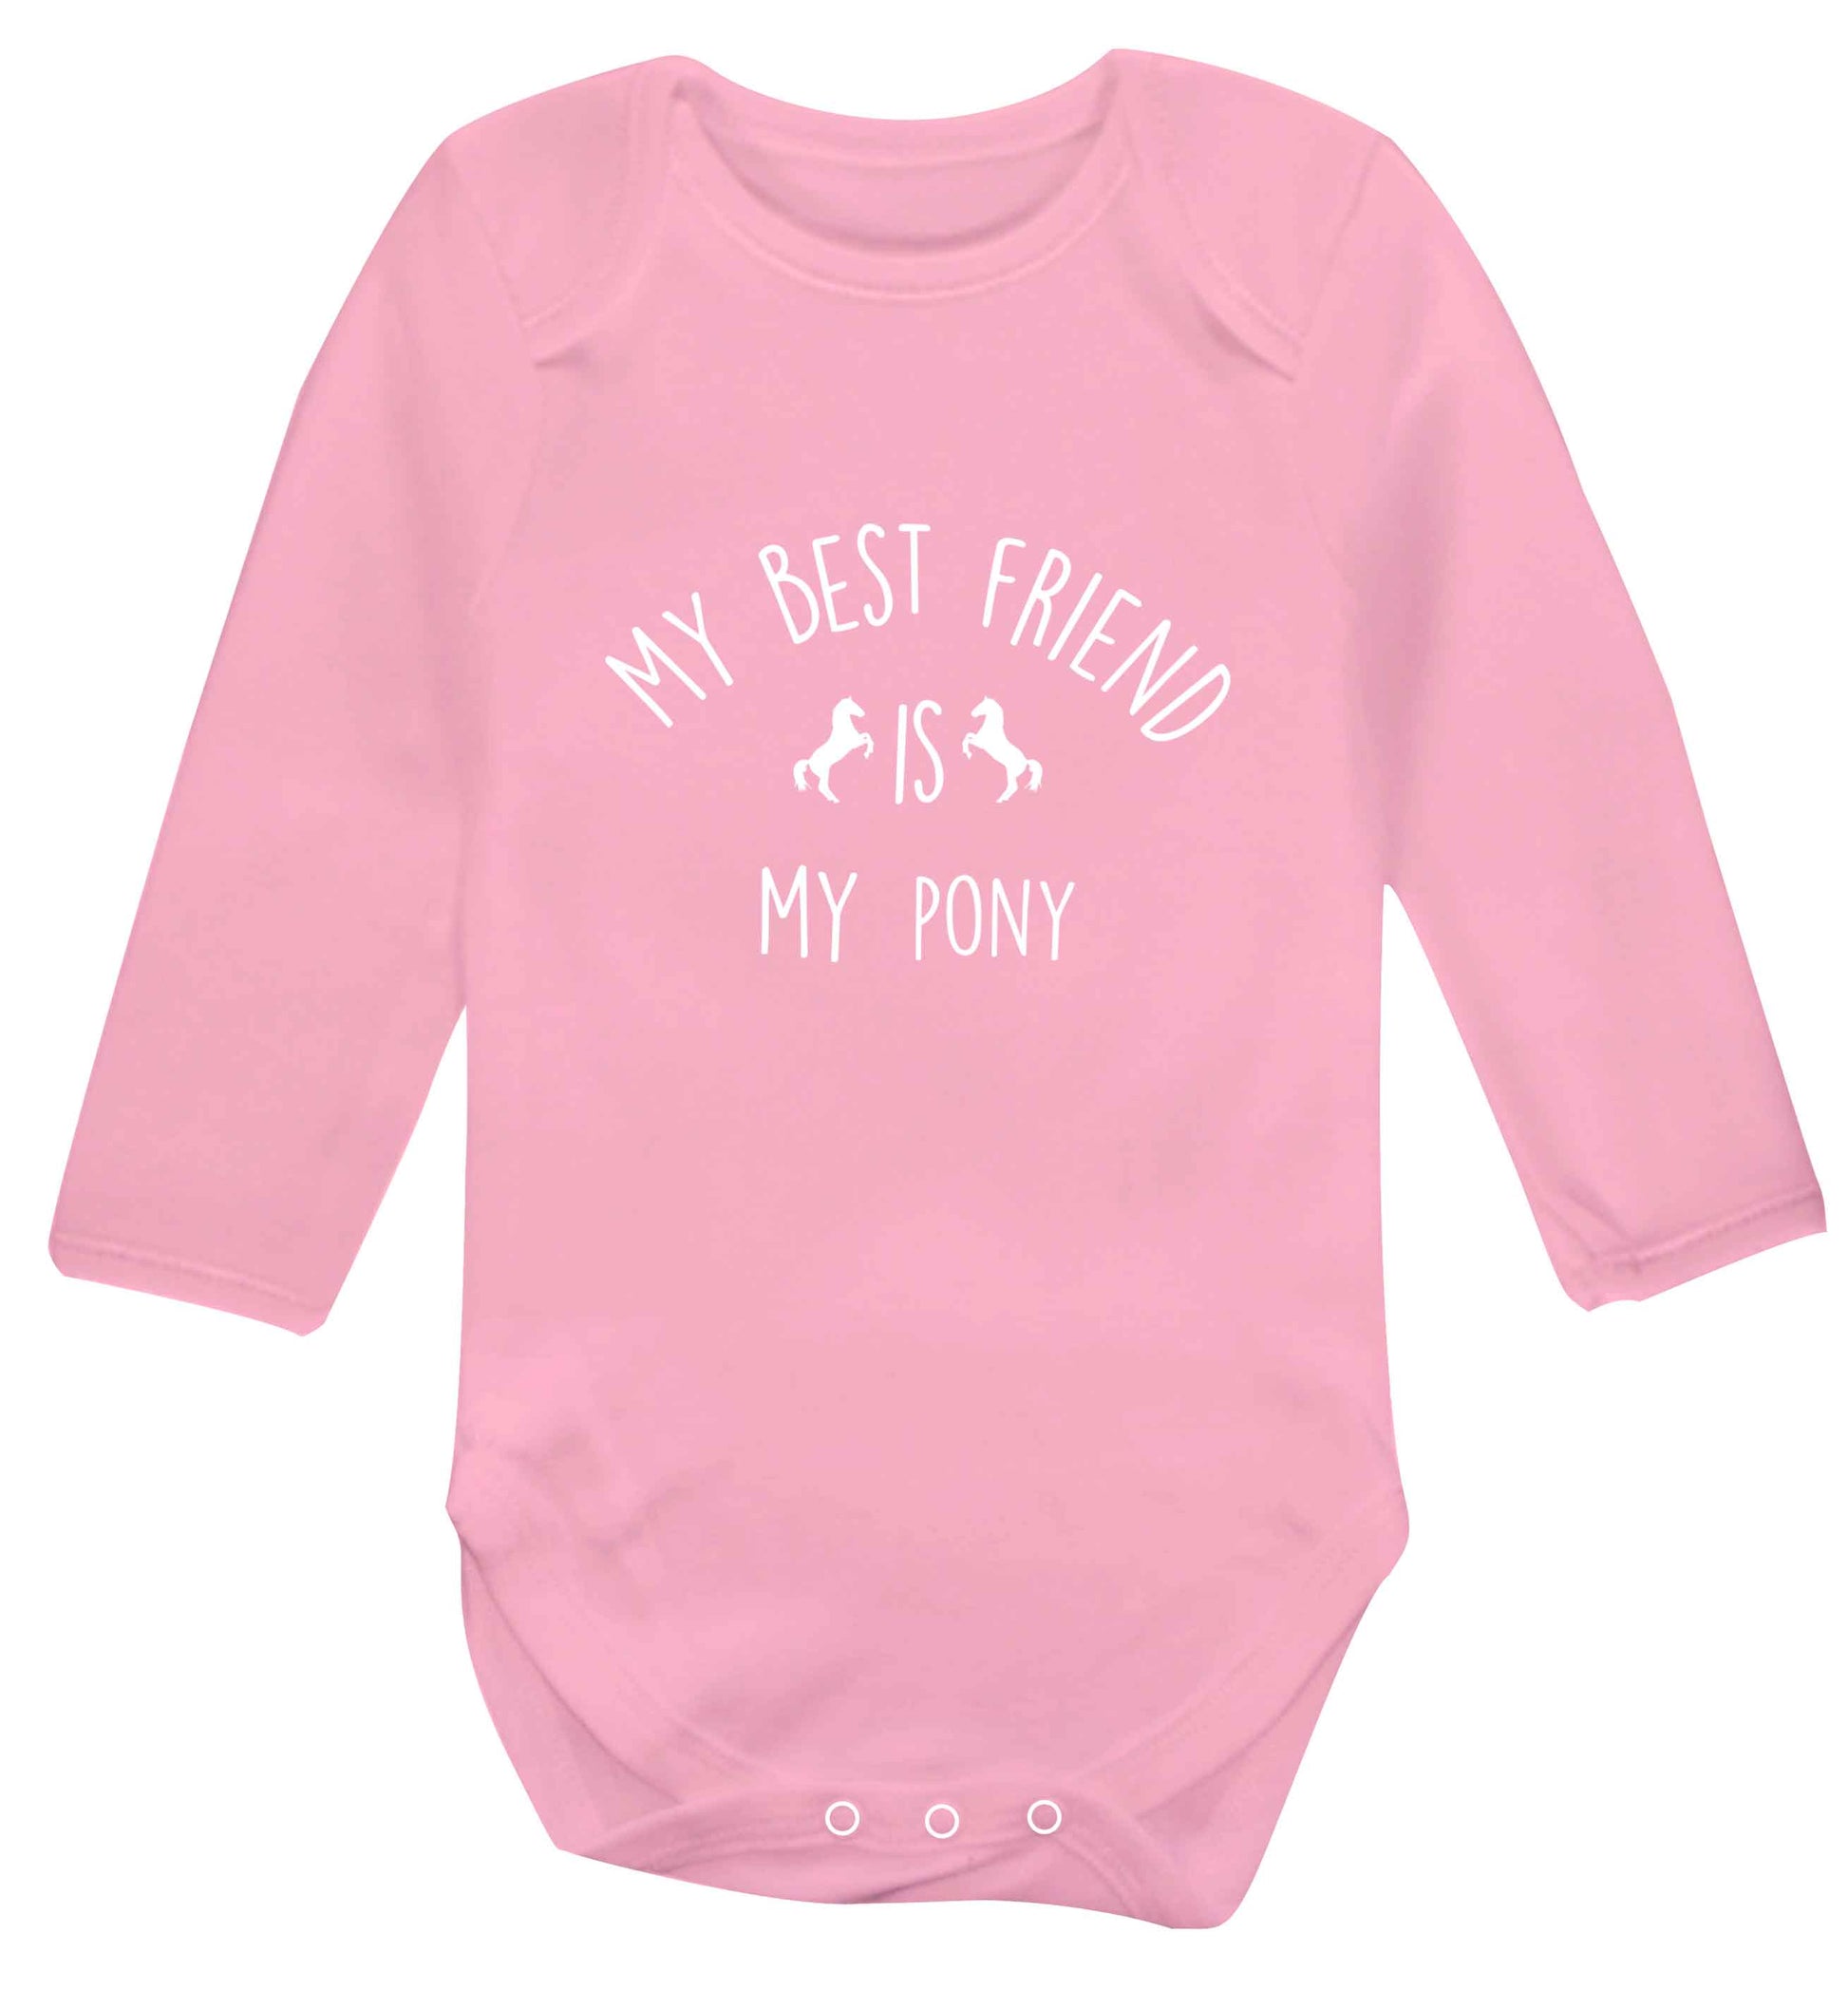 My best friend is my pony baby vest long sleeved pale pink 6-12 months